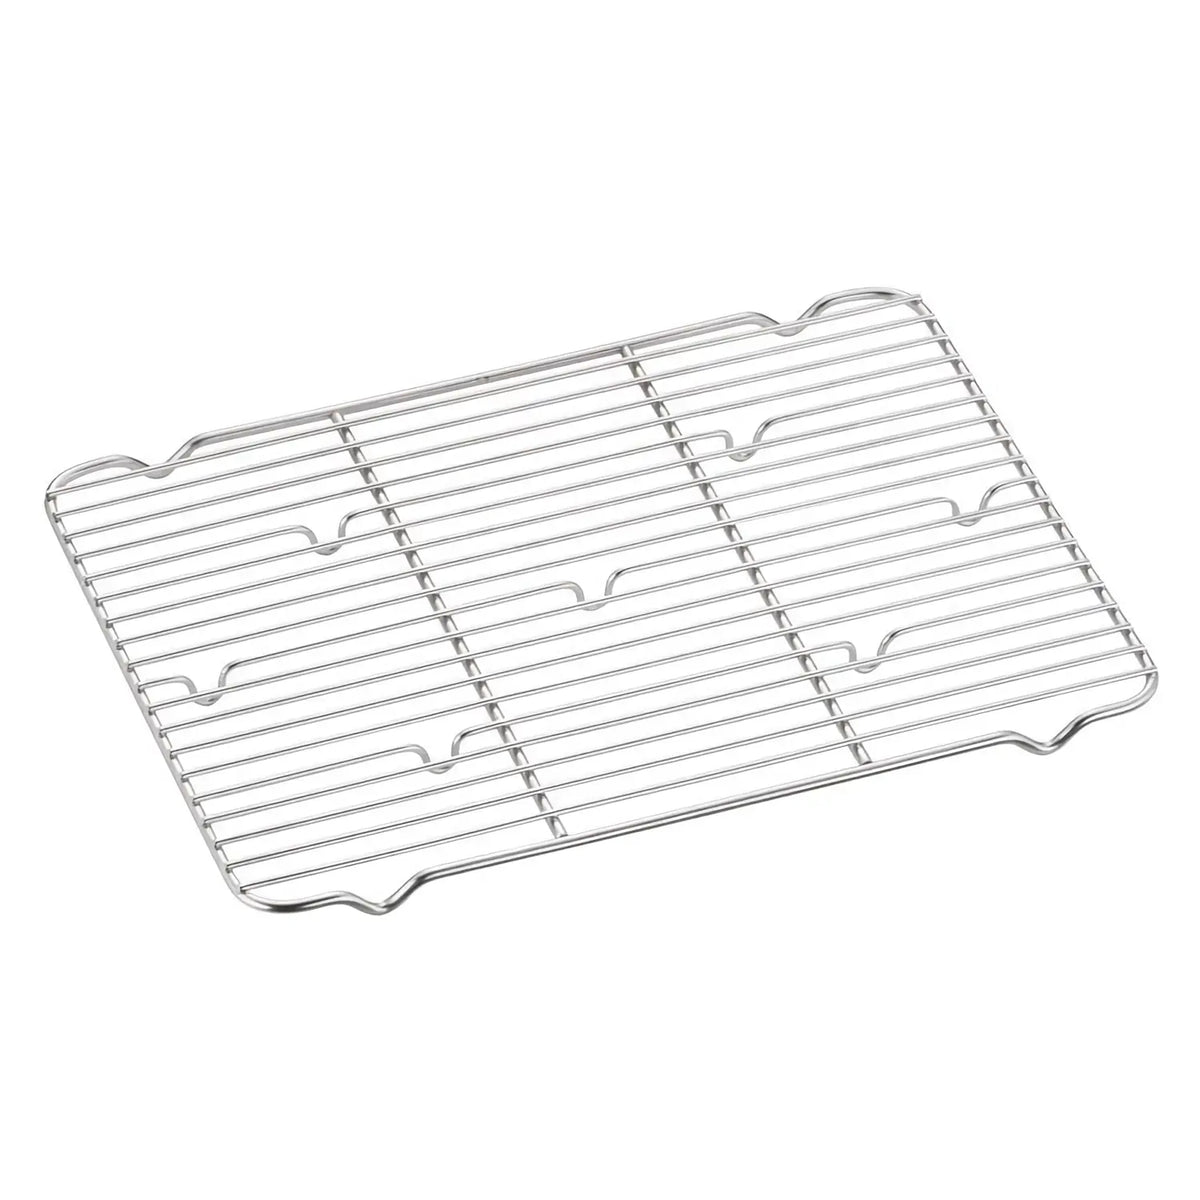 Three Snow Stainless Steel Durable Cooling Rack